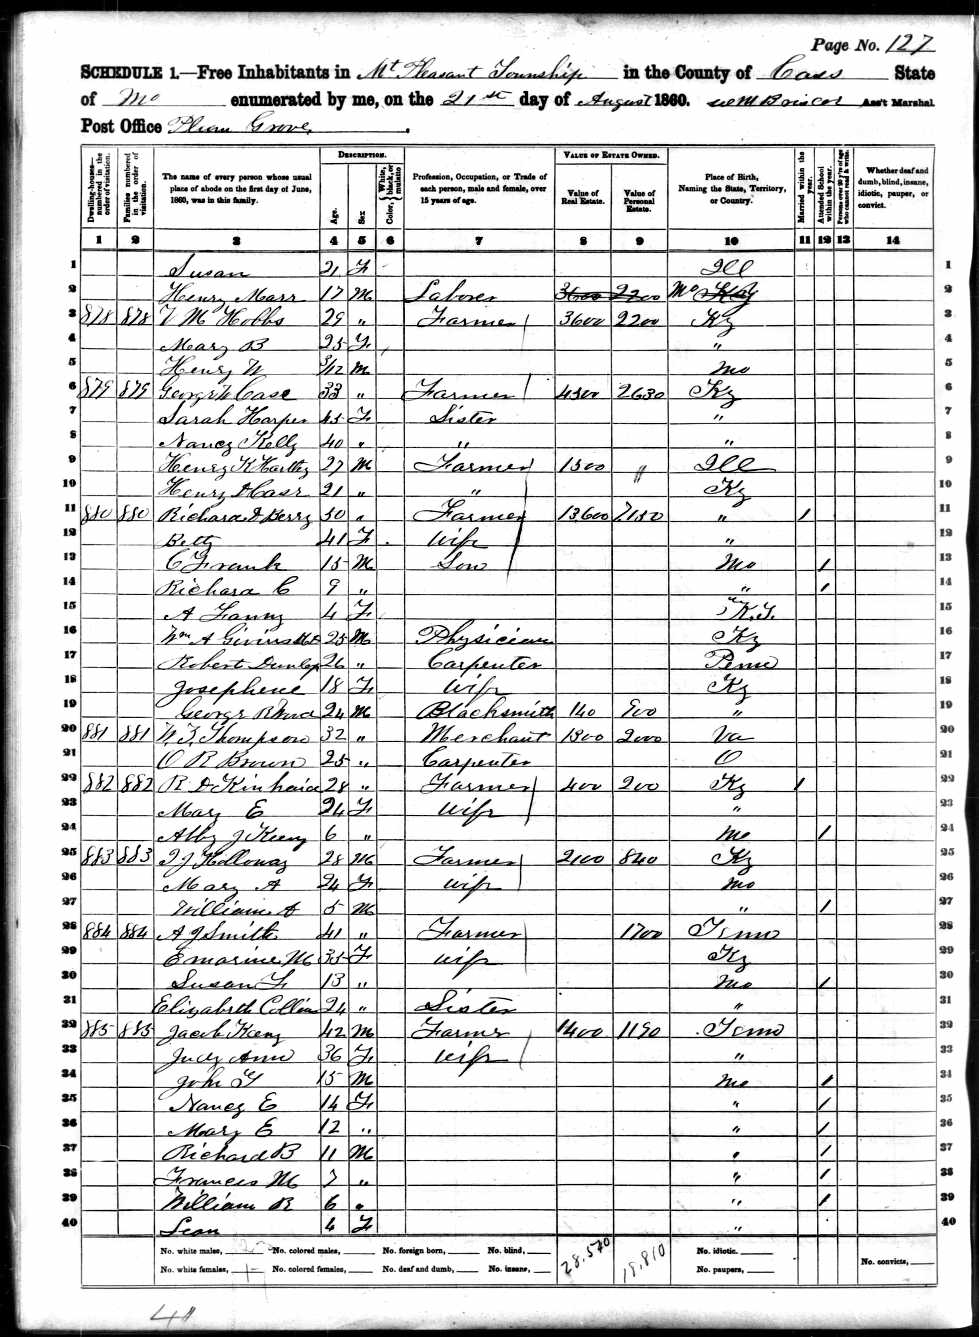 Henry K. Hartley, 1860 Cass County, Missouri, census; enumerated in the home of George Case